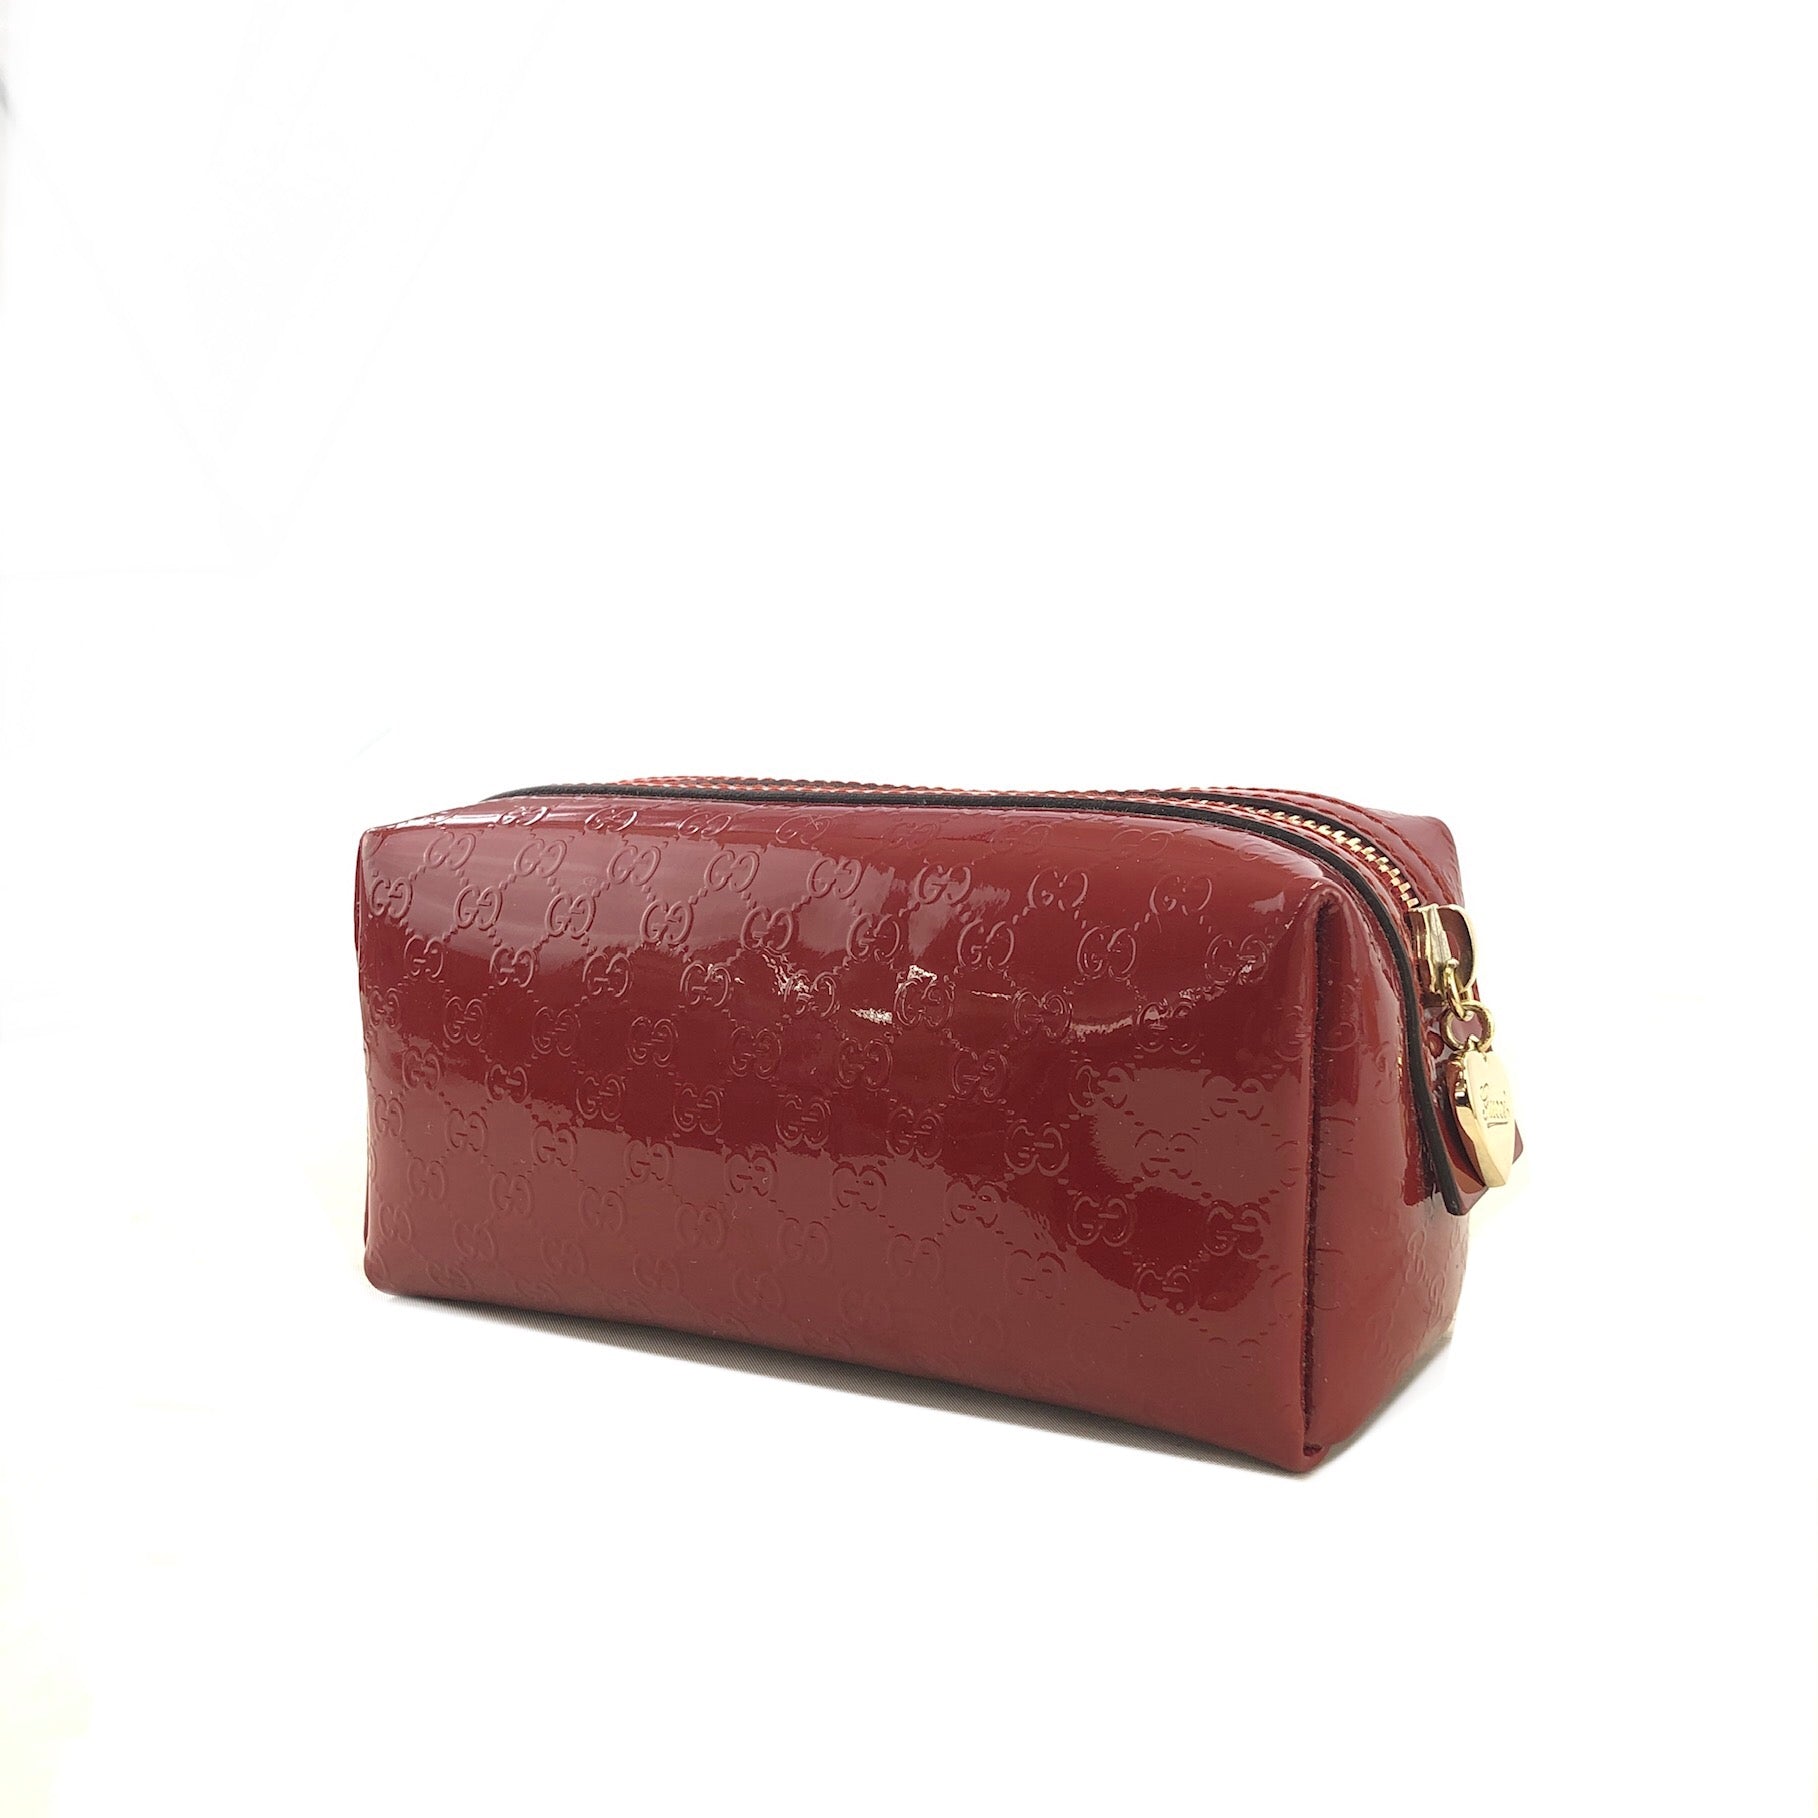 VINTAGE Gucci Red Patent Leather Womens Bag